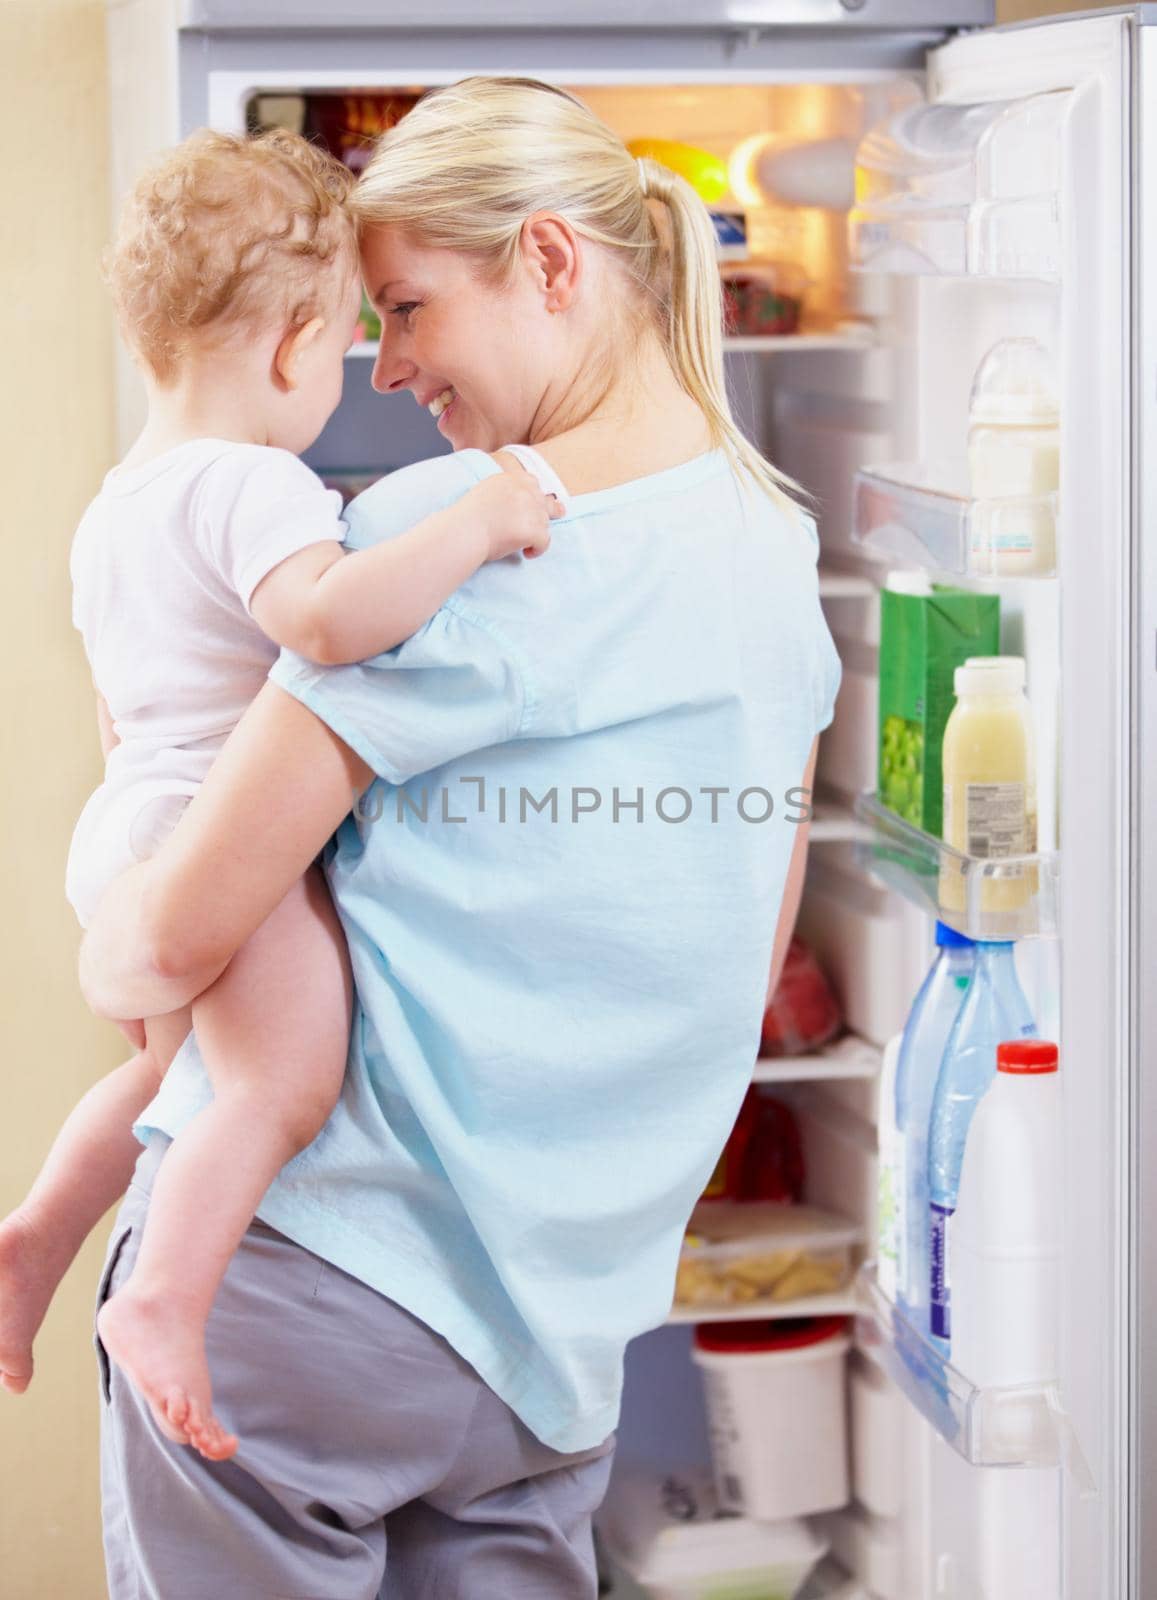 A mother standing in front of the fridge and holding her baby in her arms.